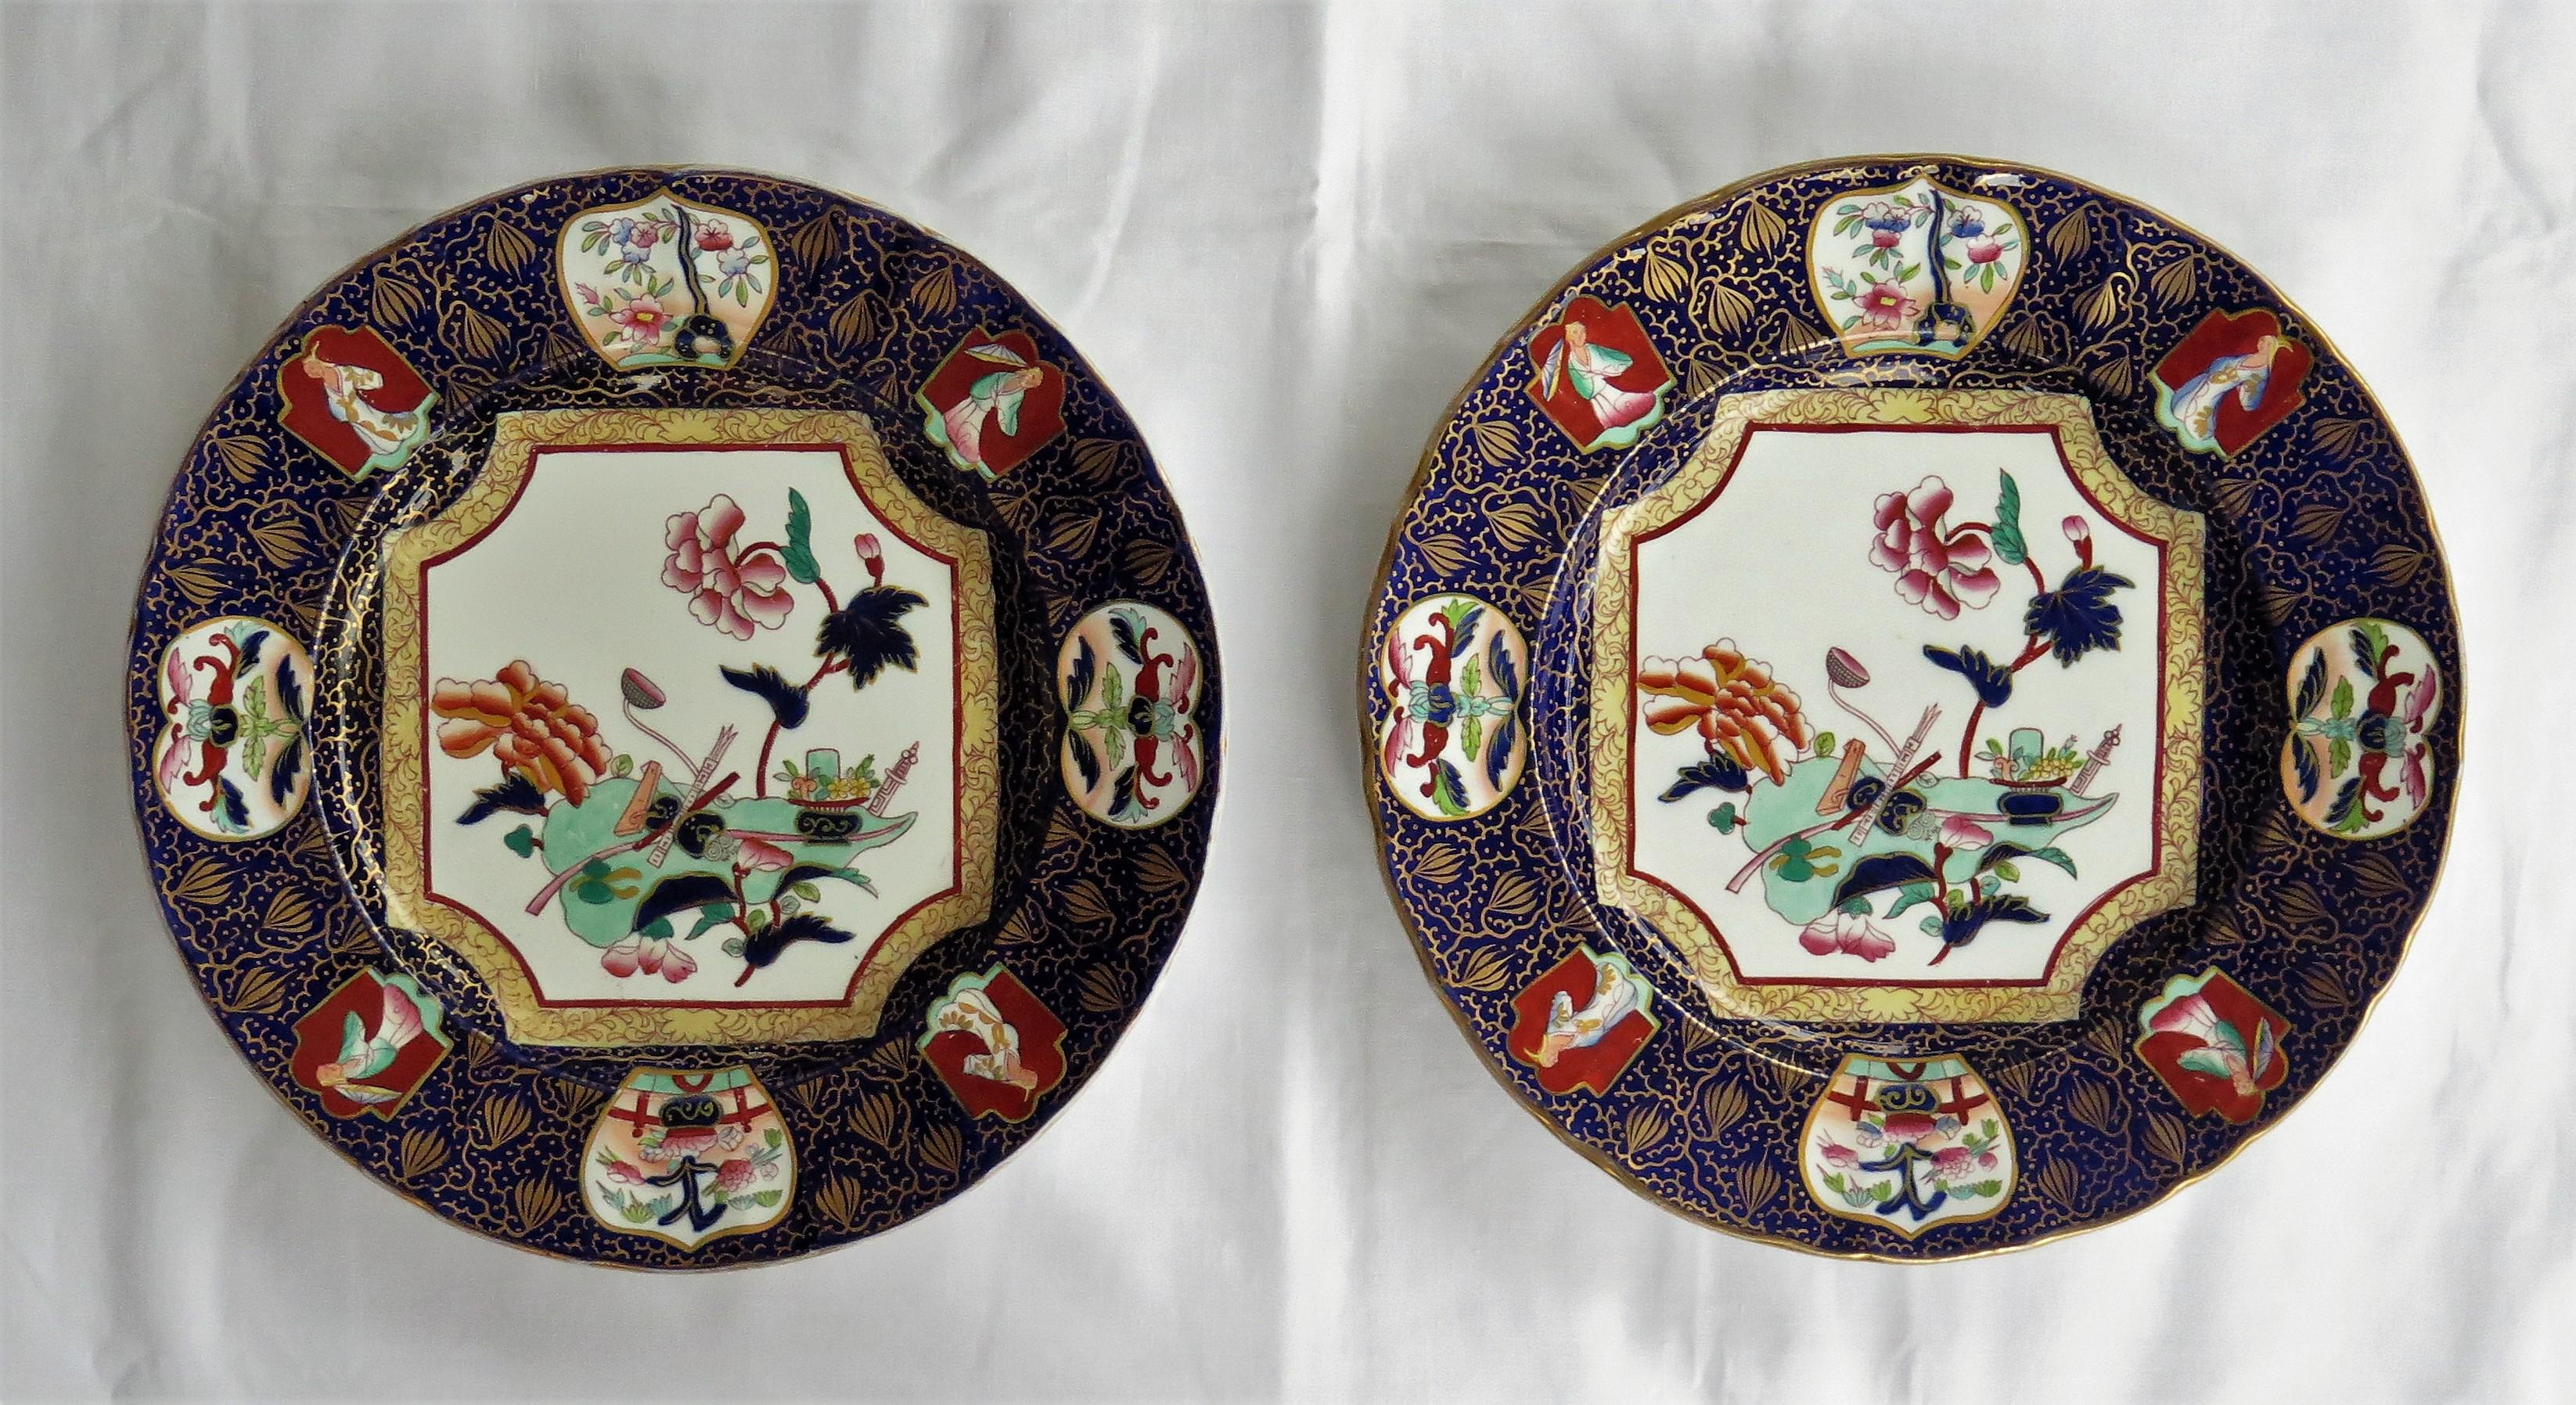 These are a beautiful pair of Mason's ironstone large Dinner Plates made during the mid-19th century, when Mason's was owned by Ashworth Brothers, circa 1870.

The plates have a very detailed Chinoiserie pattern depicting a central octagonal panel,